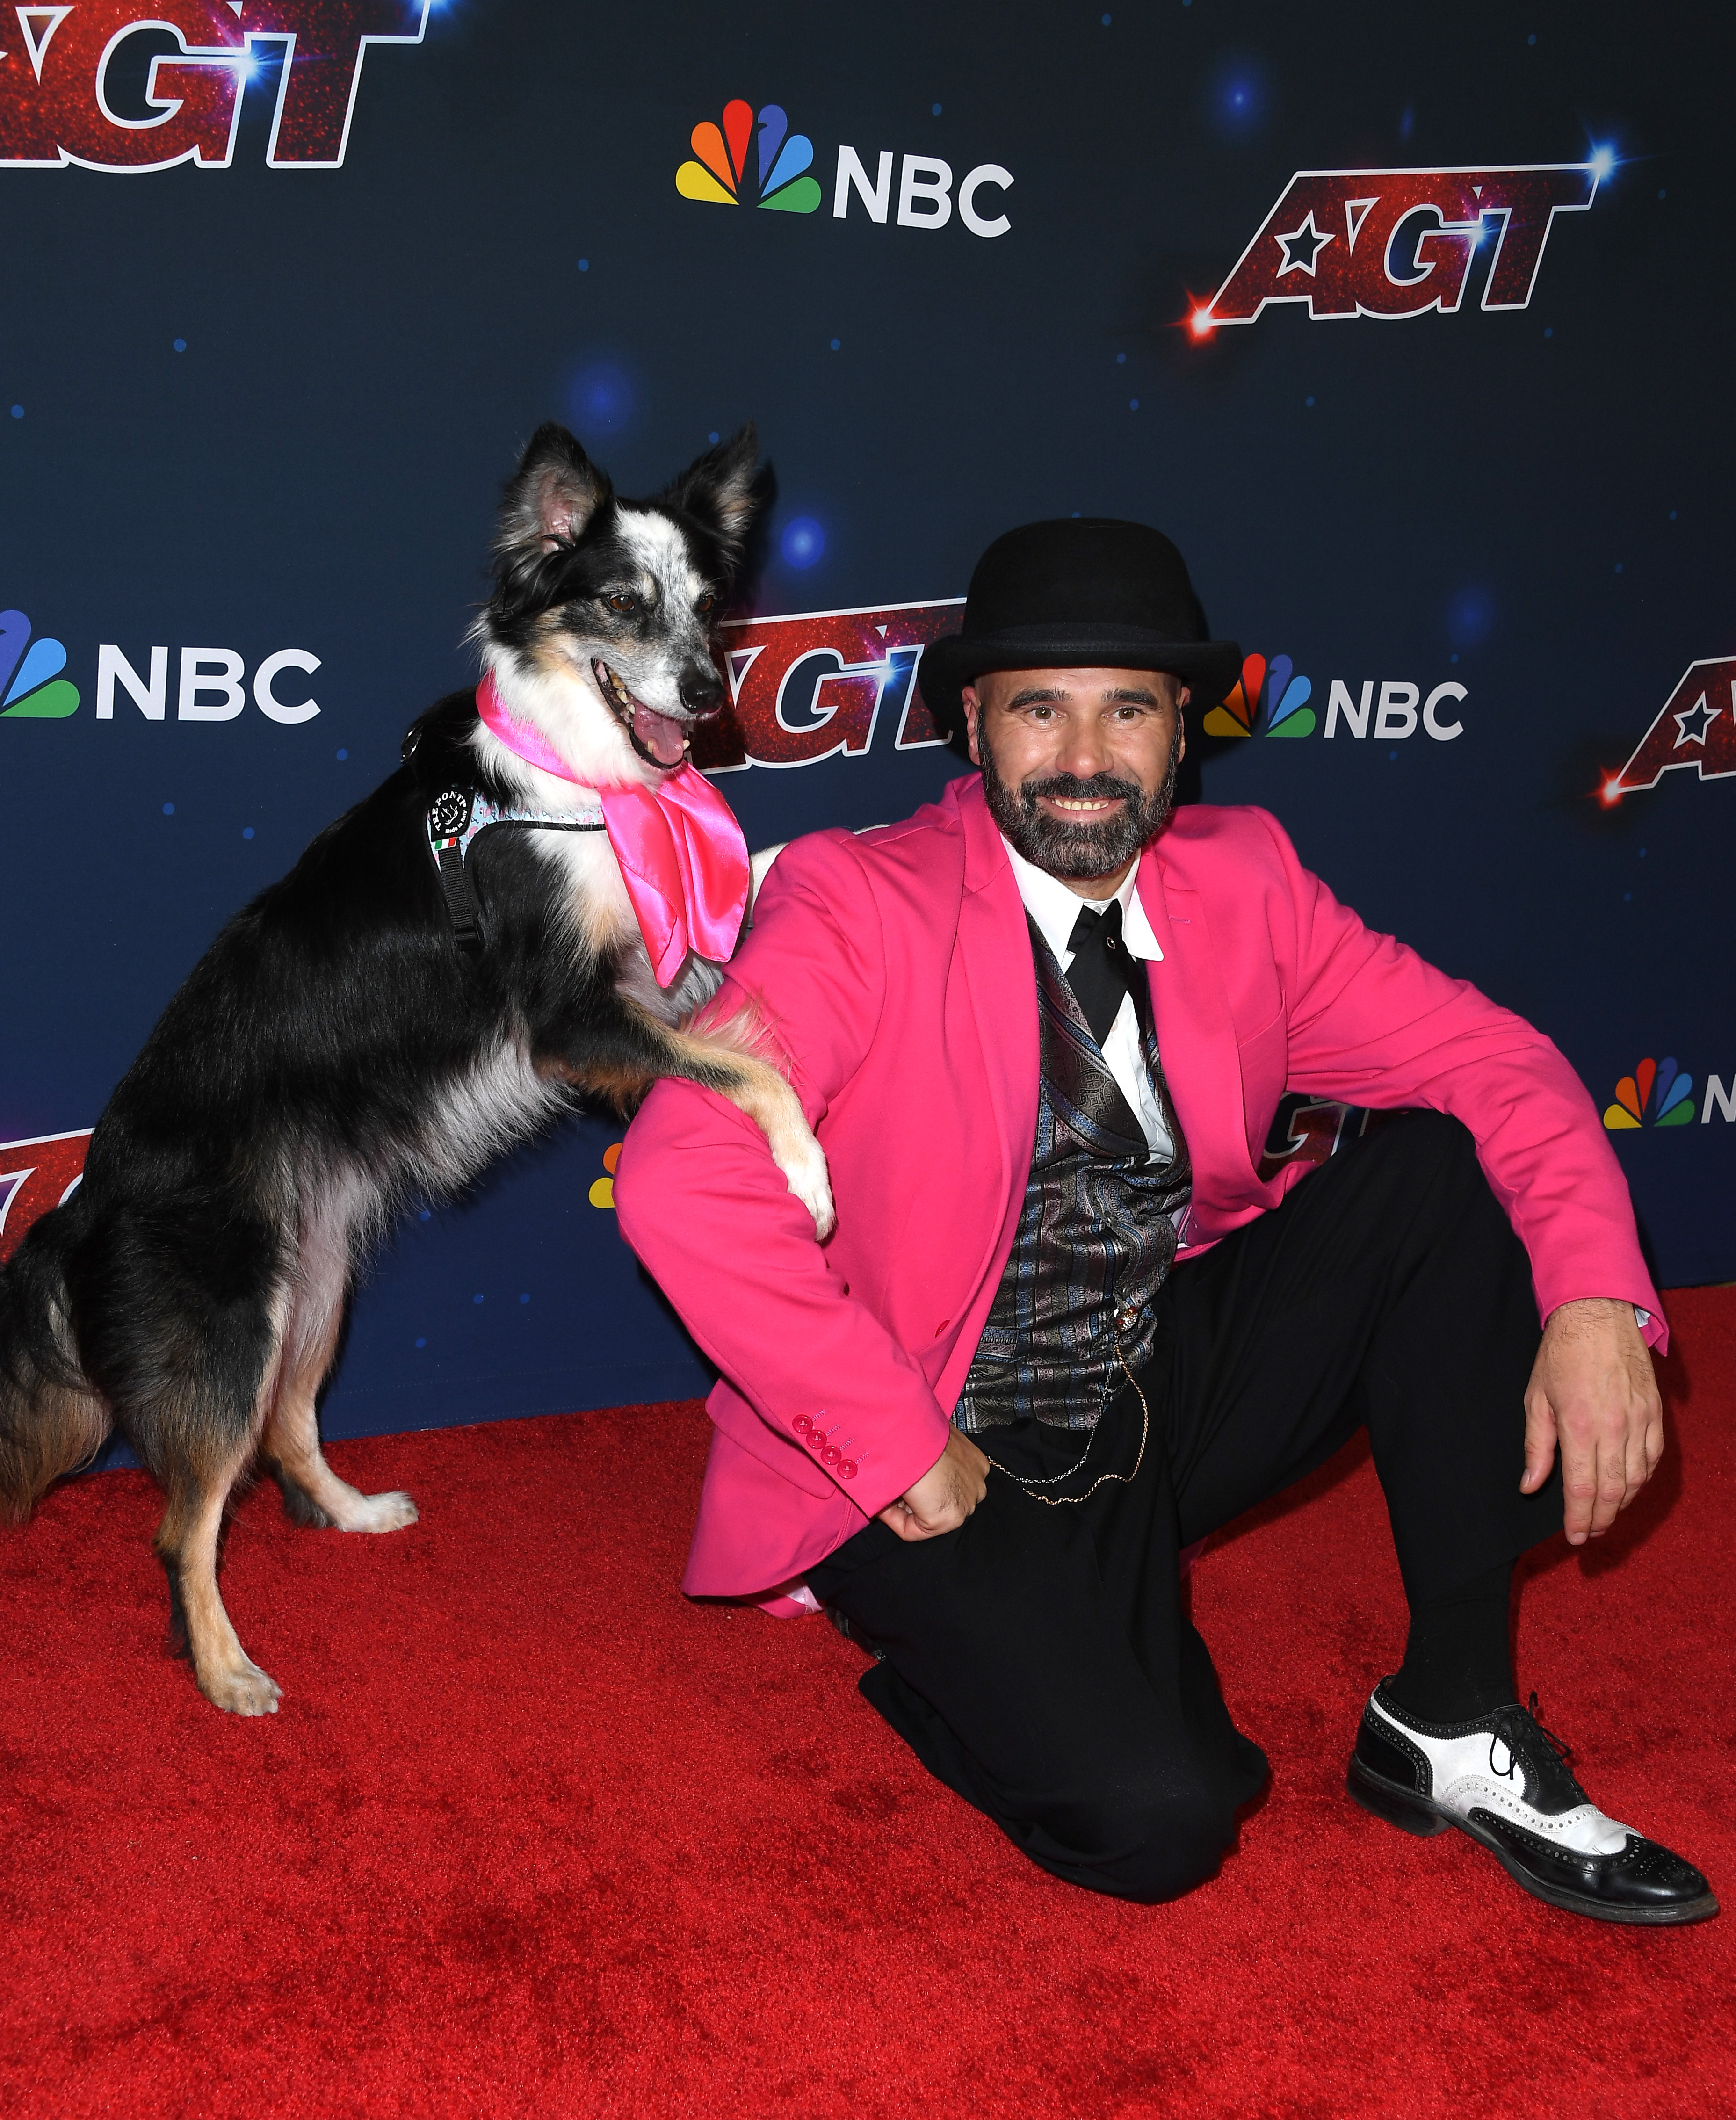 Adrian Stoica and Hurricane won America's Got Talent in 2023